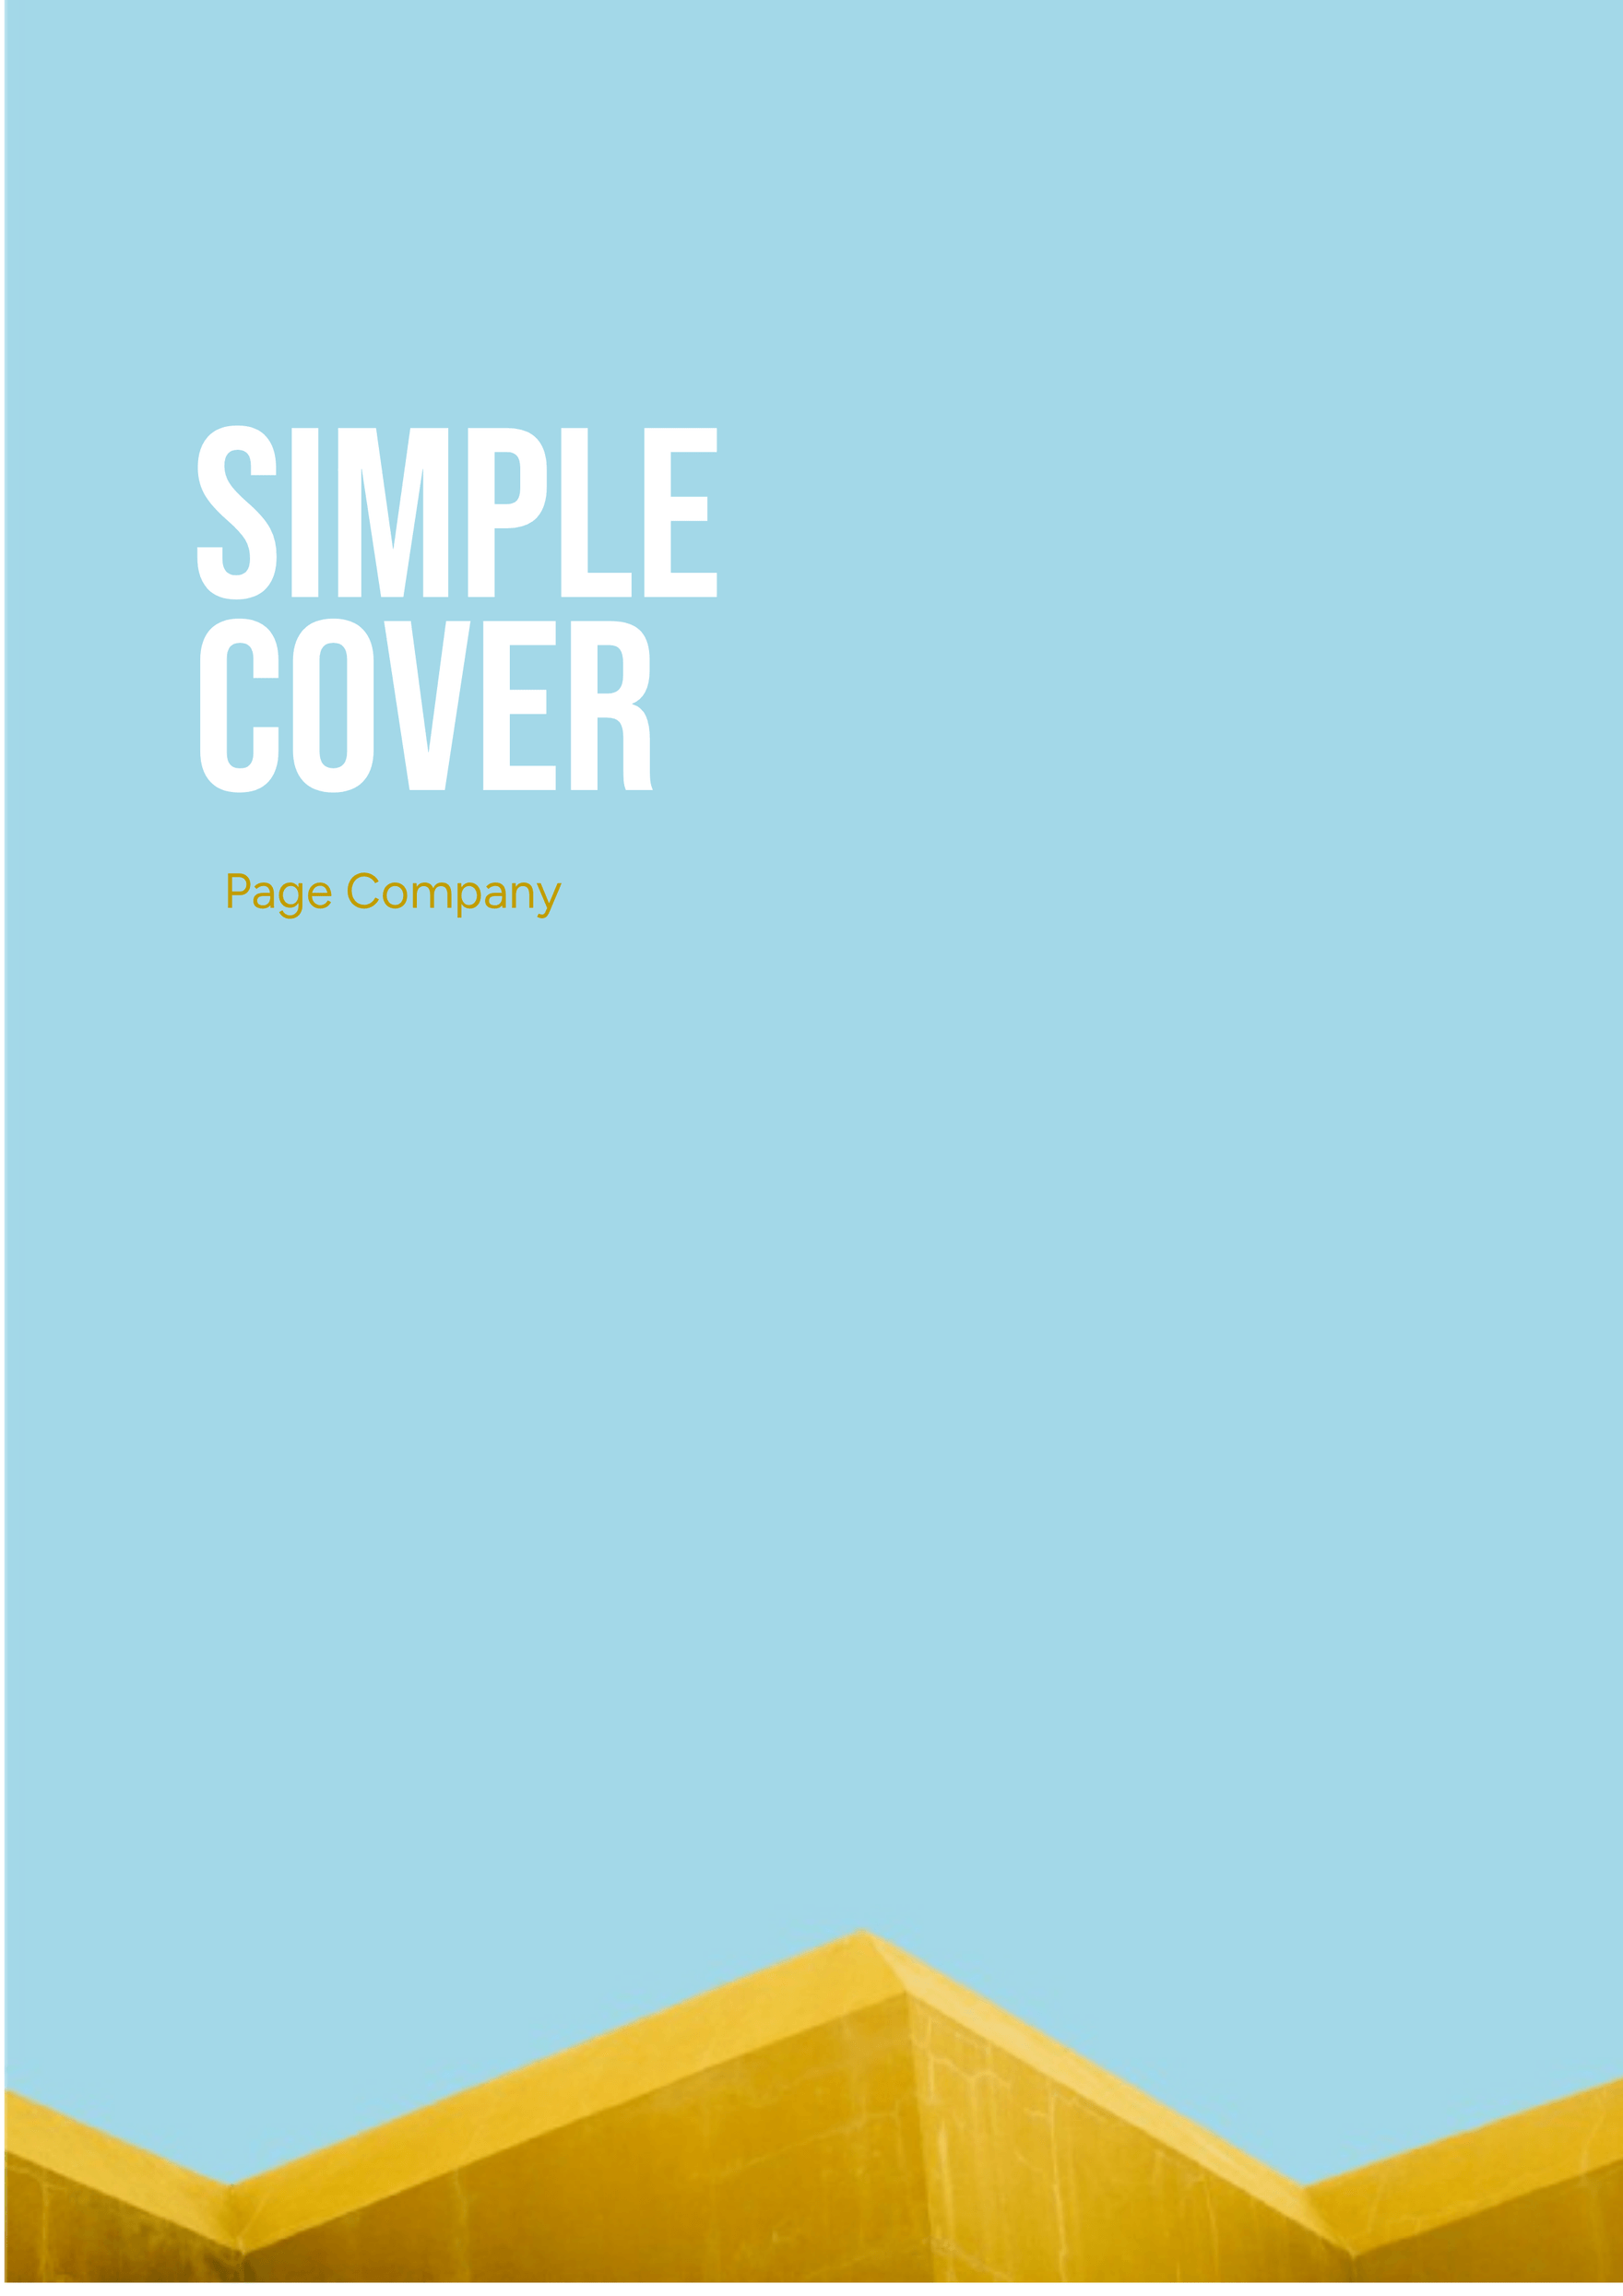 Simple Cover Page Company